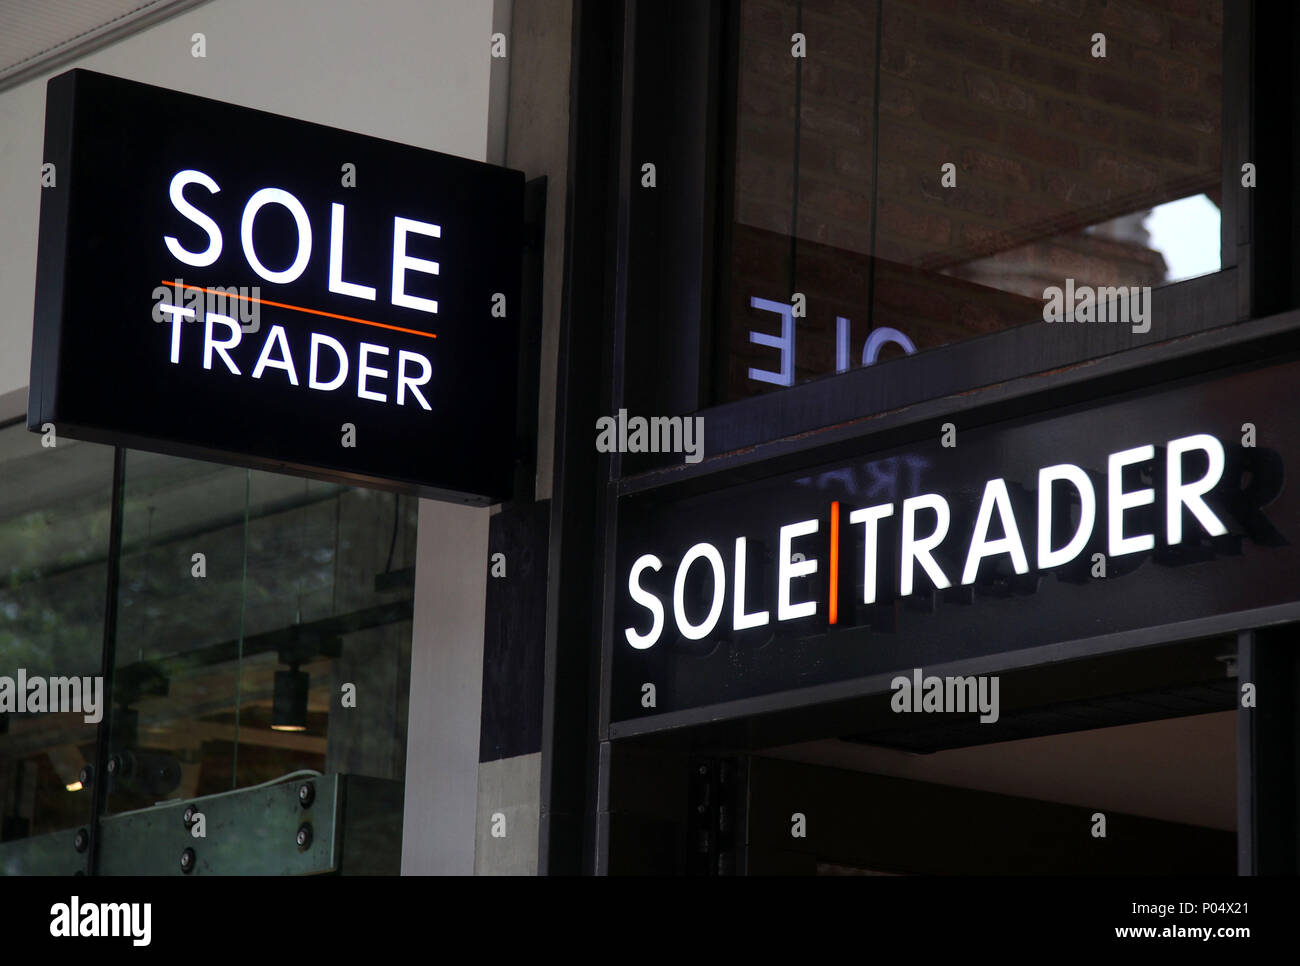 A branch of Sole Trader on Oxford Street, central London. Stock Photo